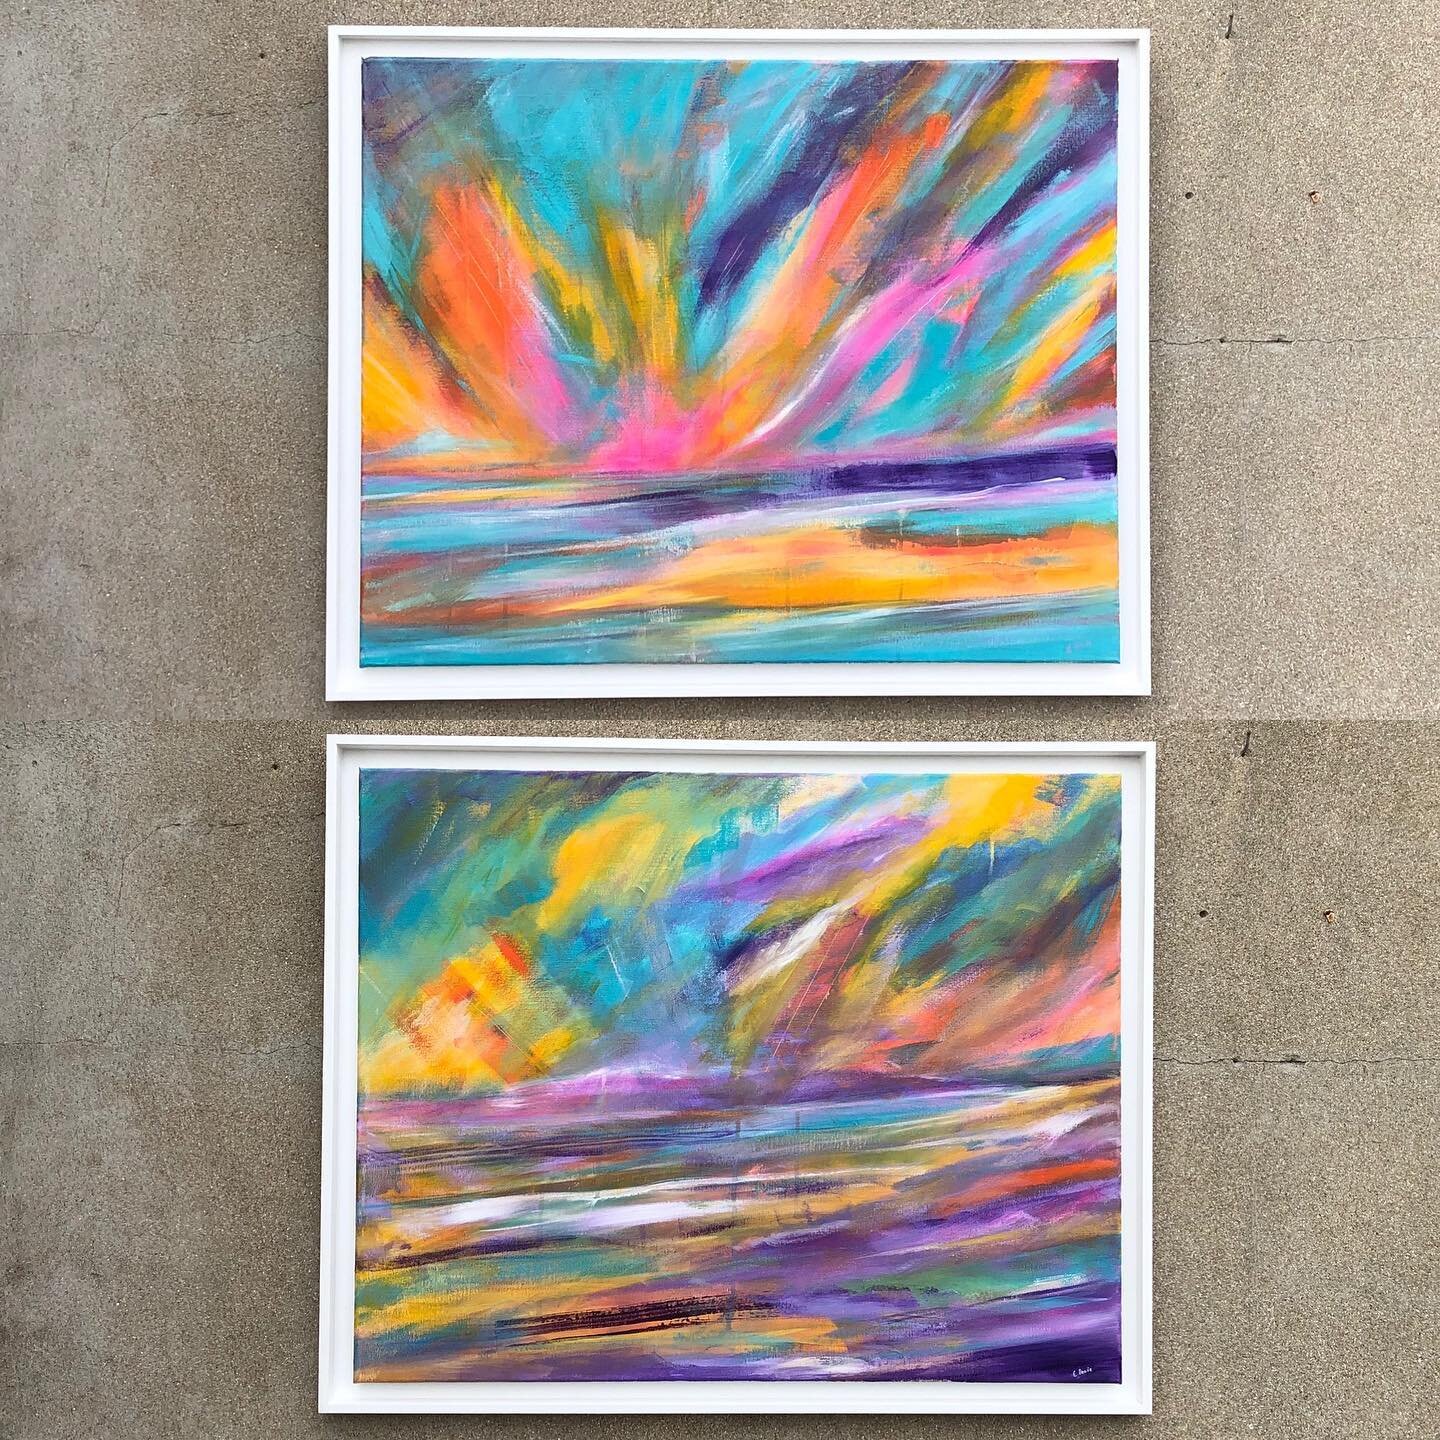 Please vote in the comments! Which one should I apply to exhibit with the @royalacademyarts Summer Exhibition? 

#art #royalacademy #painting #artist #artwork #summerexhibition #summerexhibition2021 #ra #royalacademyofarts #lifeofanartist #landscape 